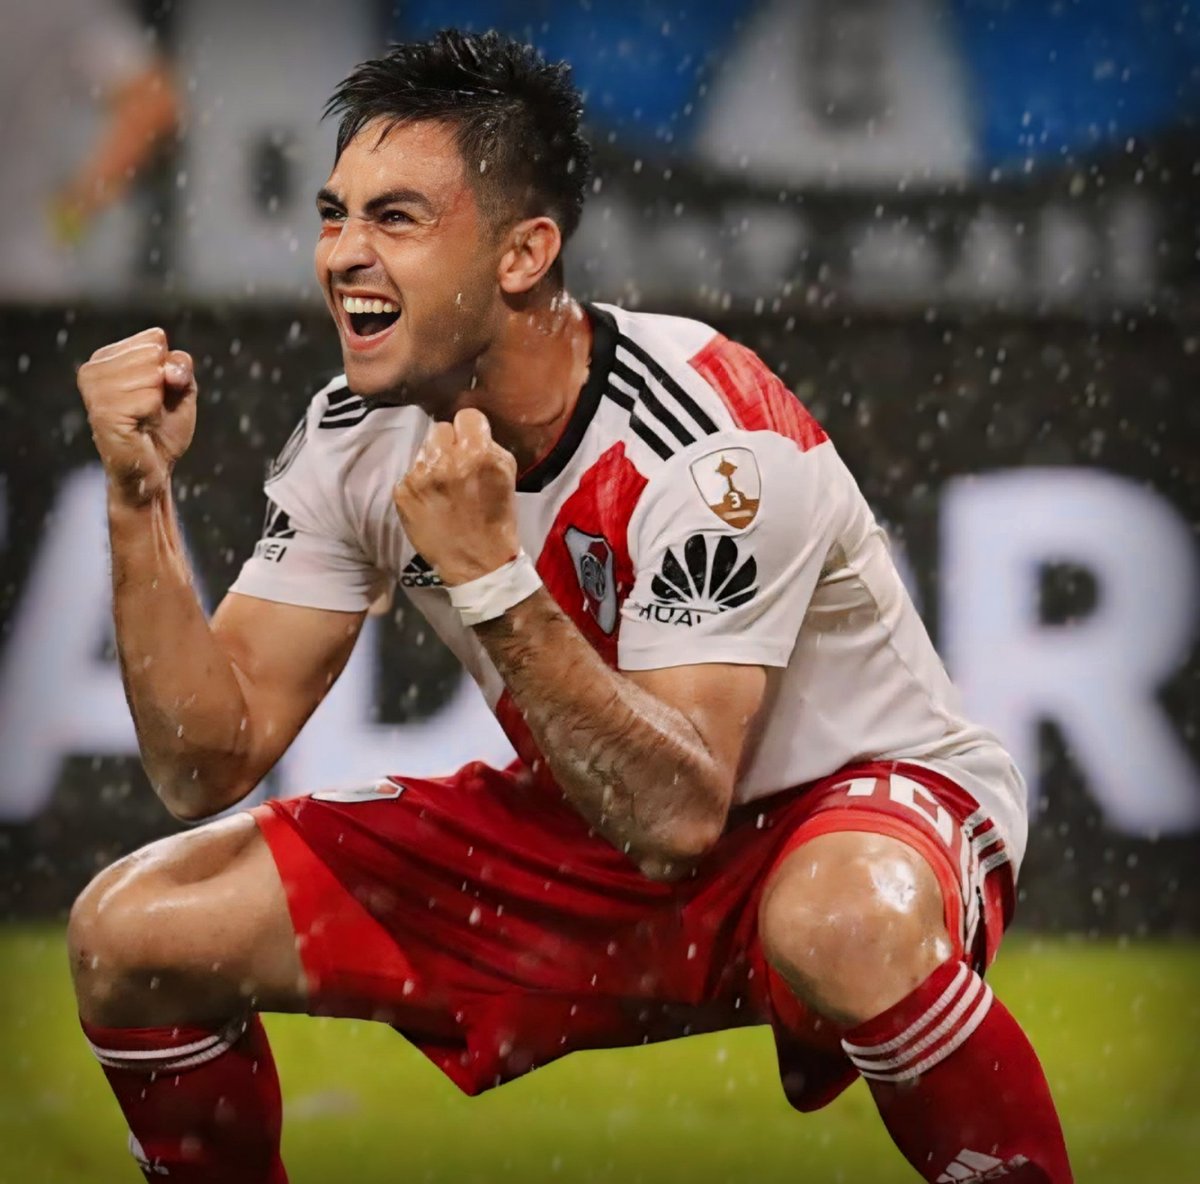 River Plate Pictures That Go Hard. (@hardriverpics) on Twitter photo 2024-04-03 22:42:32